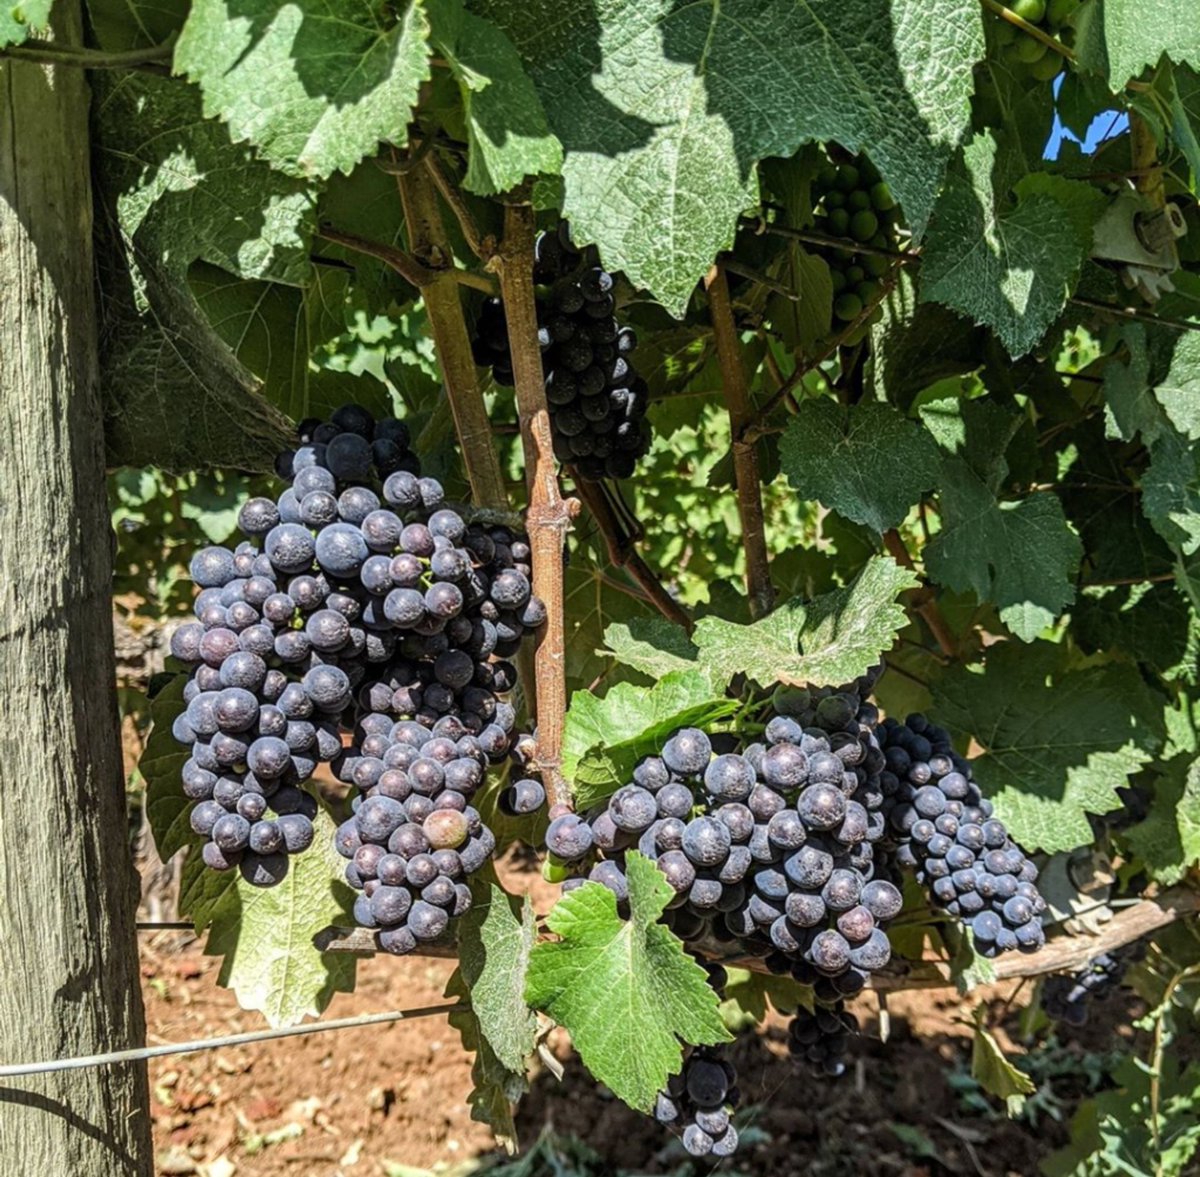 Pinot grapes are popping off! #pinotnoir #wvharvest2020 #wvwines